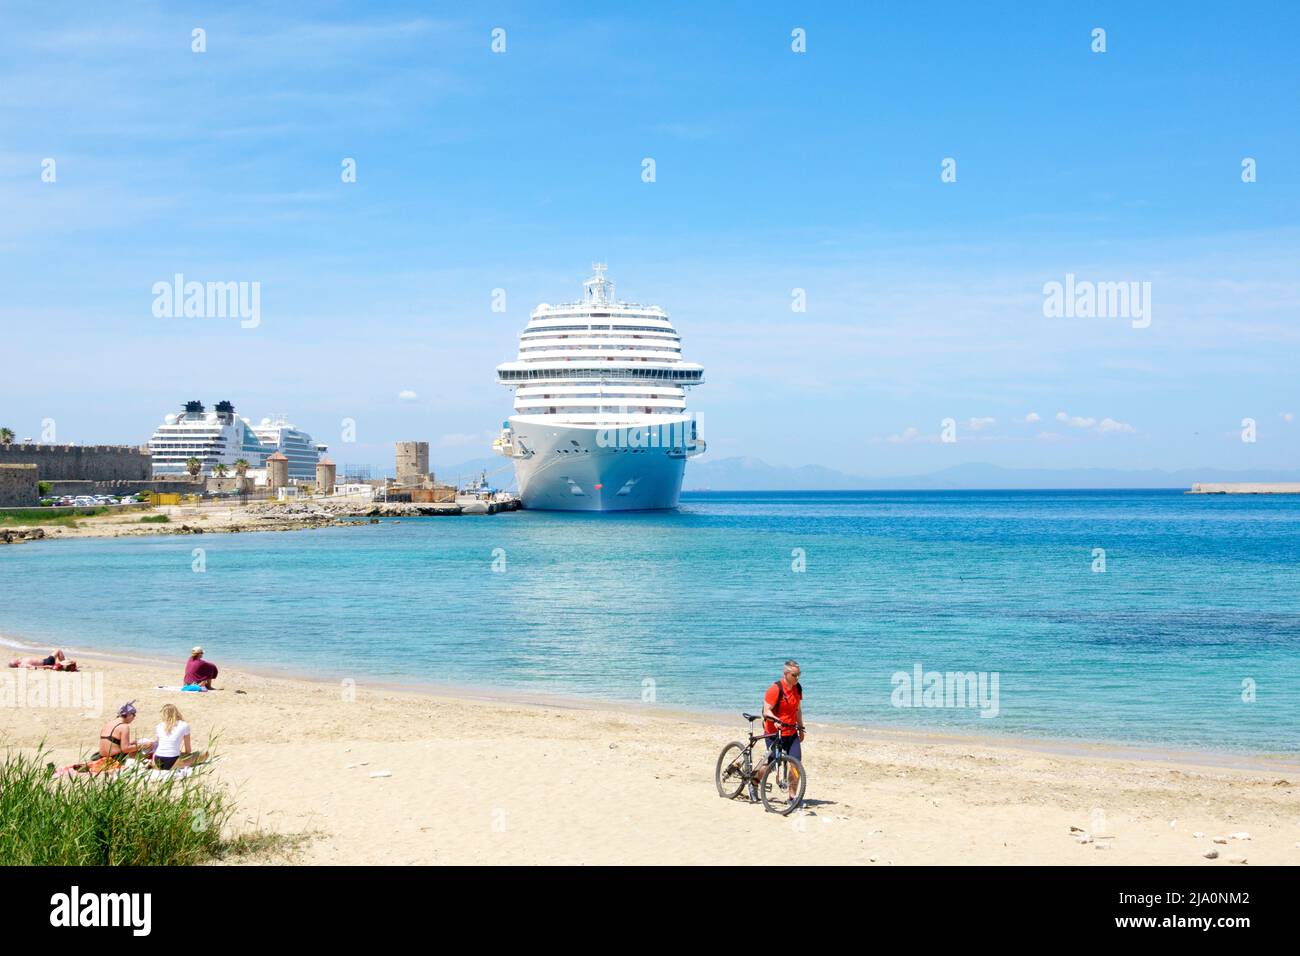 A view across a beach to the Costa Venezia cruise ship moored up in Mandraki Marina during a visit to Rhodes City, Rhodes, Greece Stock Photo